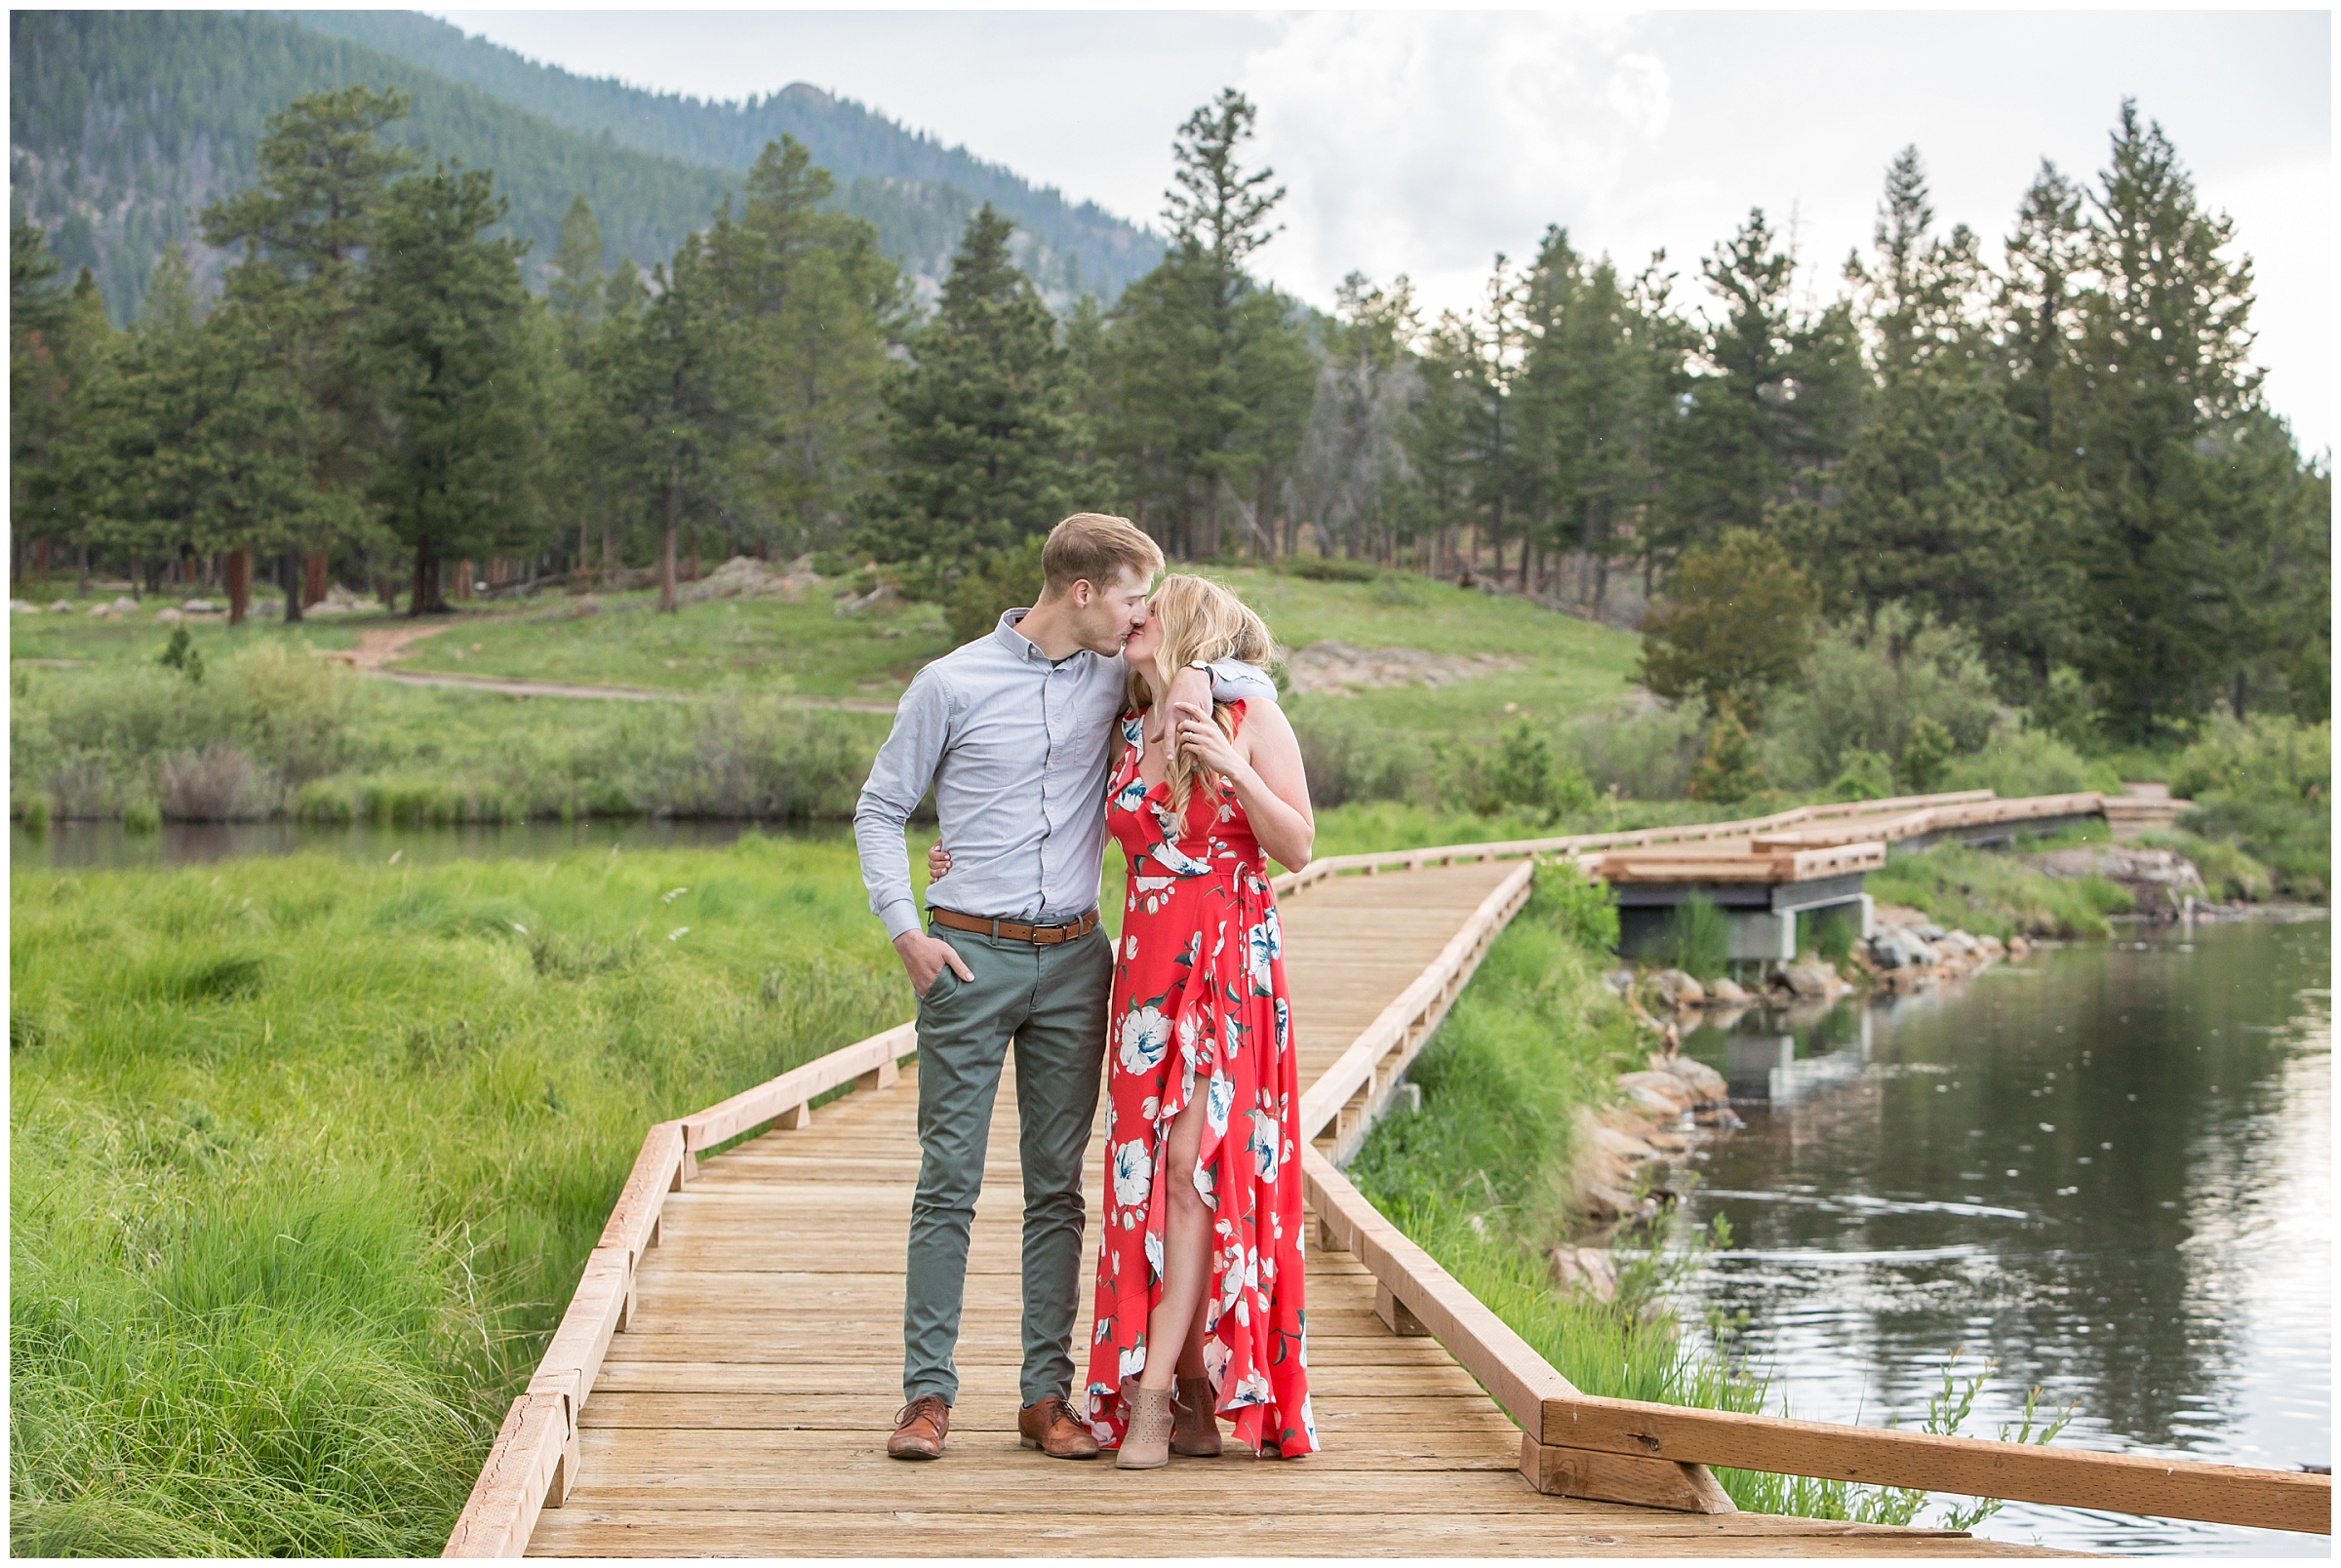 Estes Park Engagement Photography at Lili Lake in Rocky Mountain National Park Colorado